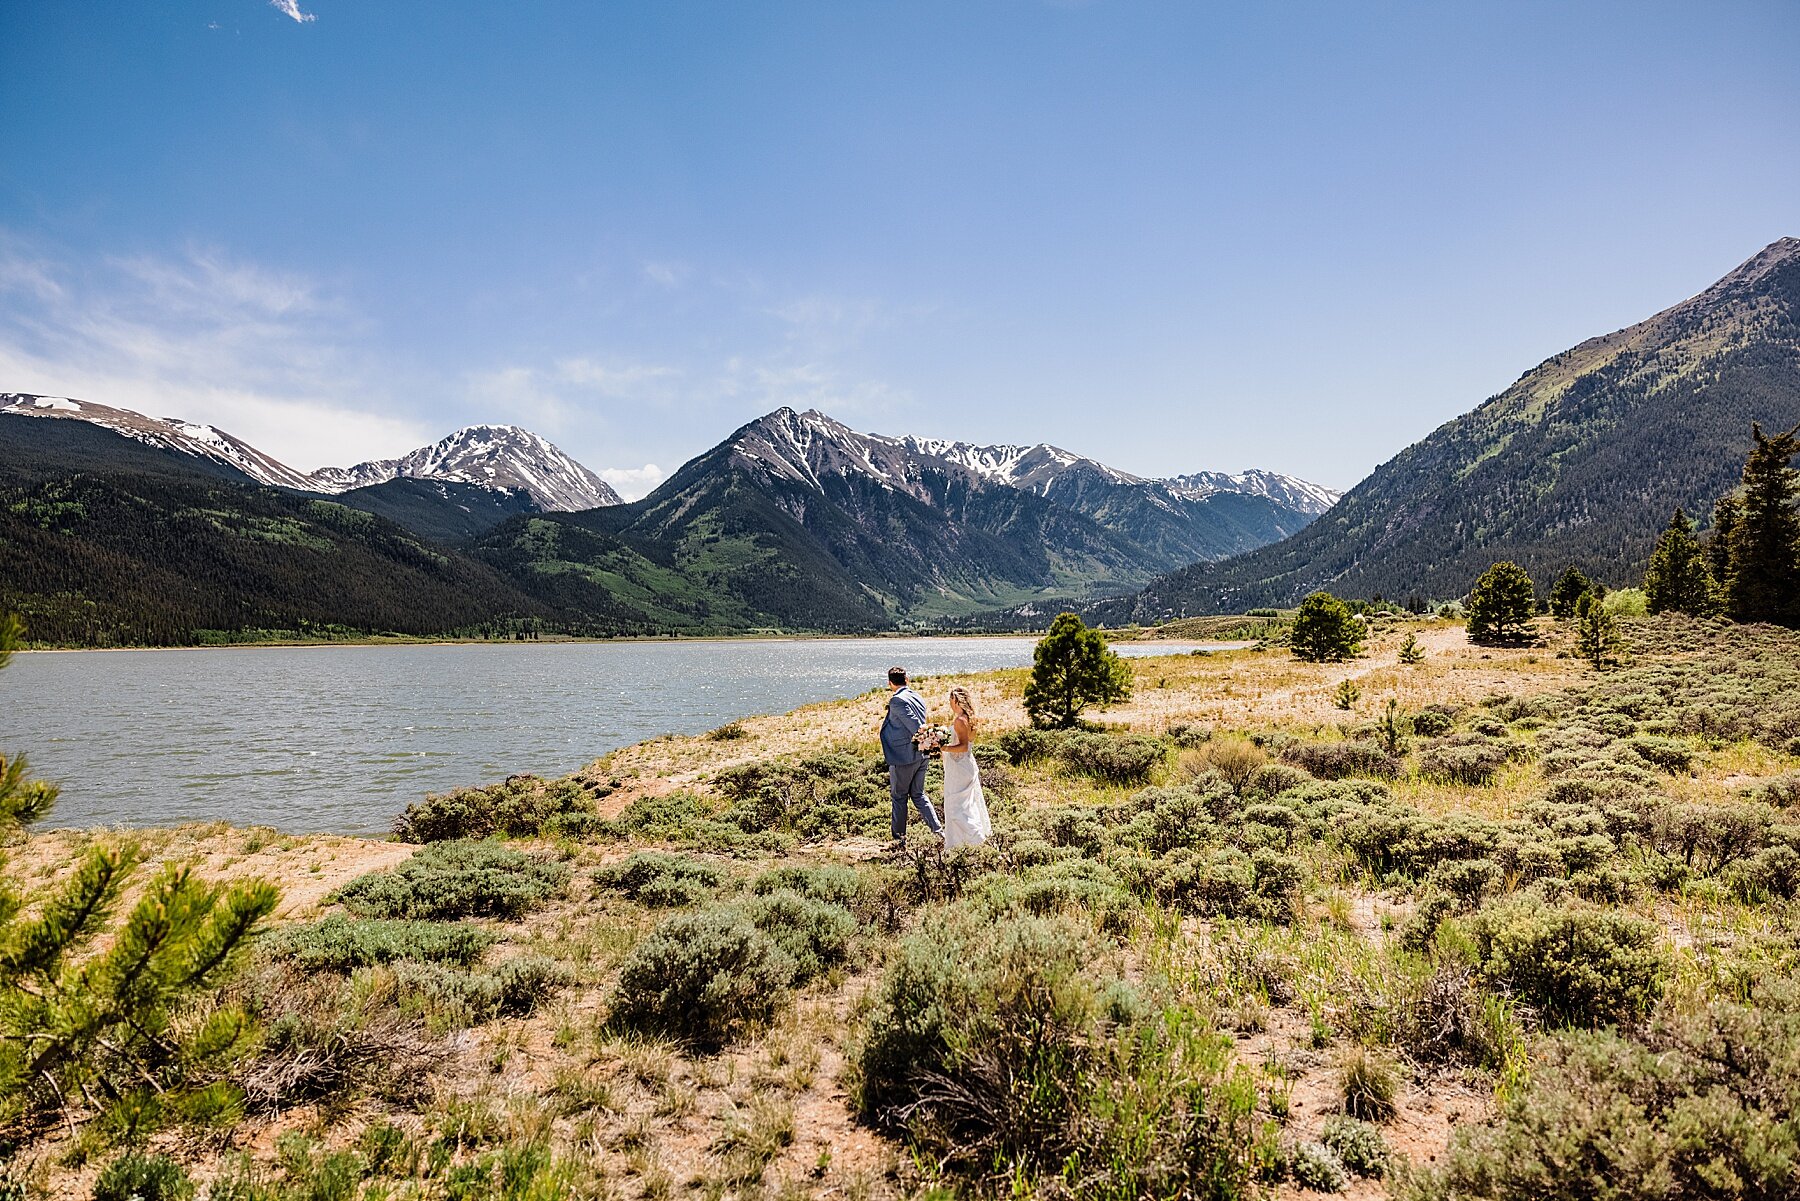 Tennessee Pass Cookhouse Elopement in Colorado | Vow of the Wild